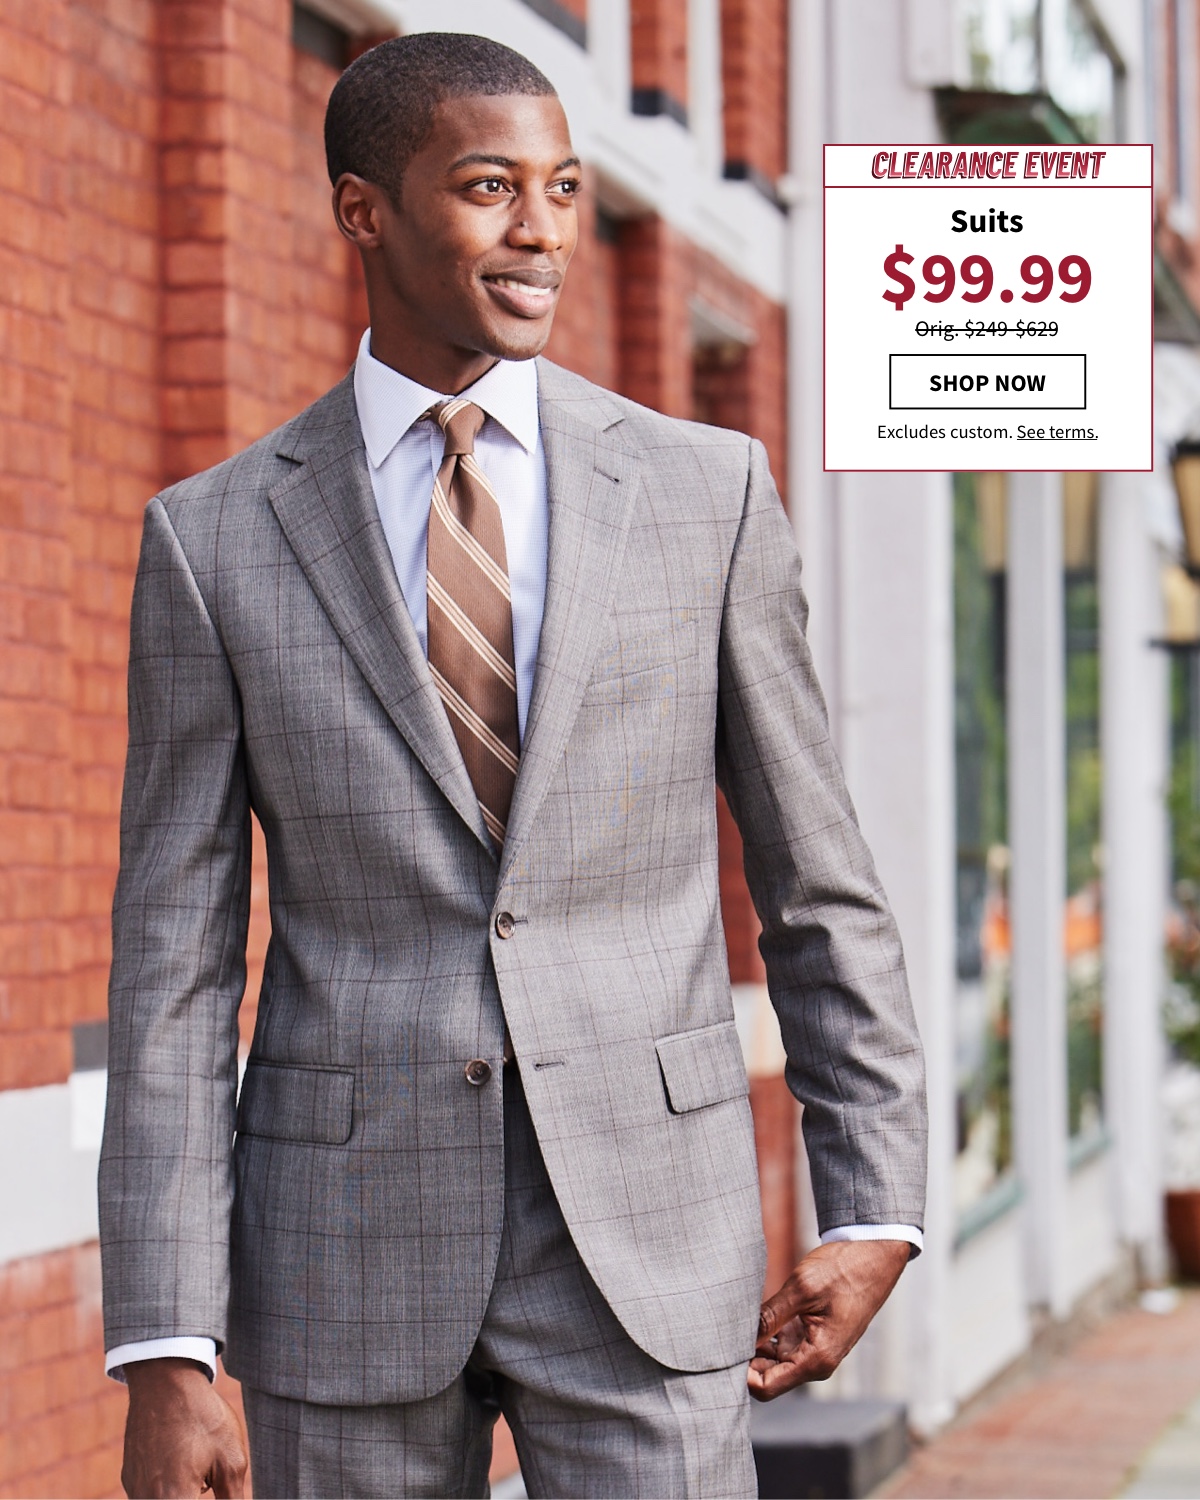 man in suit Clearance Event Suits $99.99 Shop Now